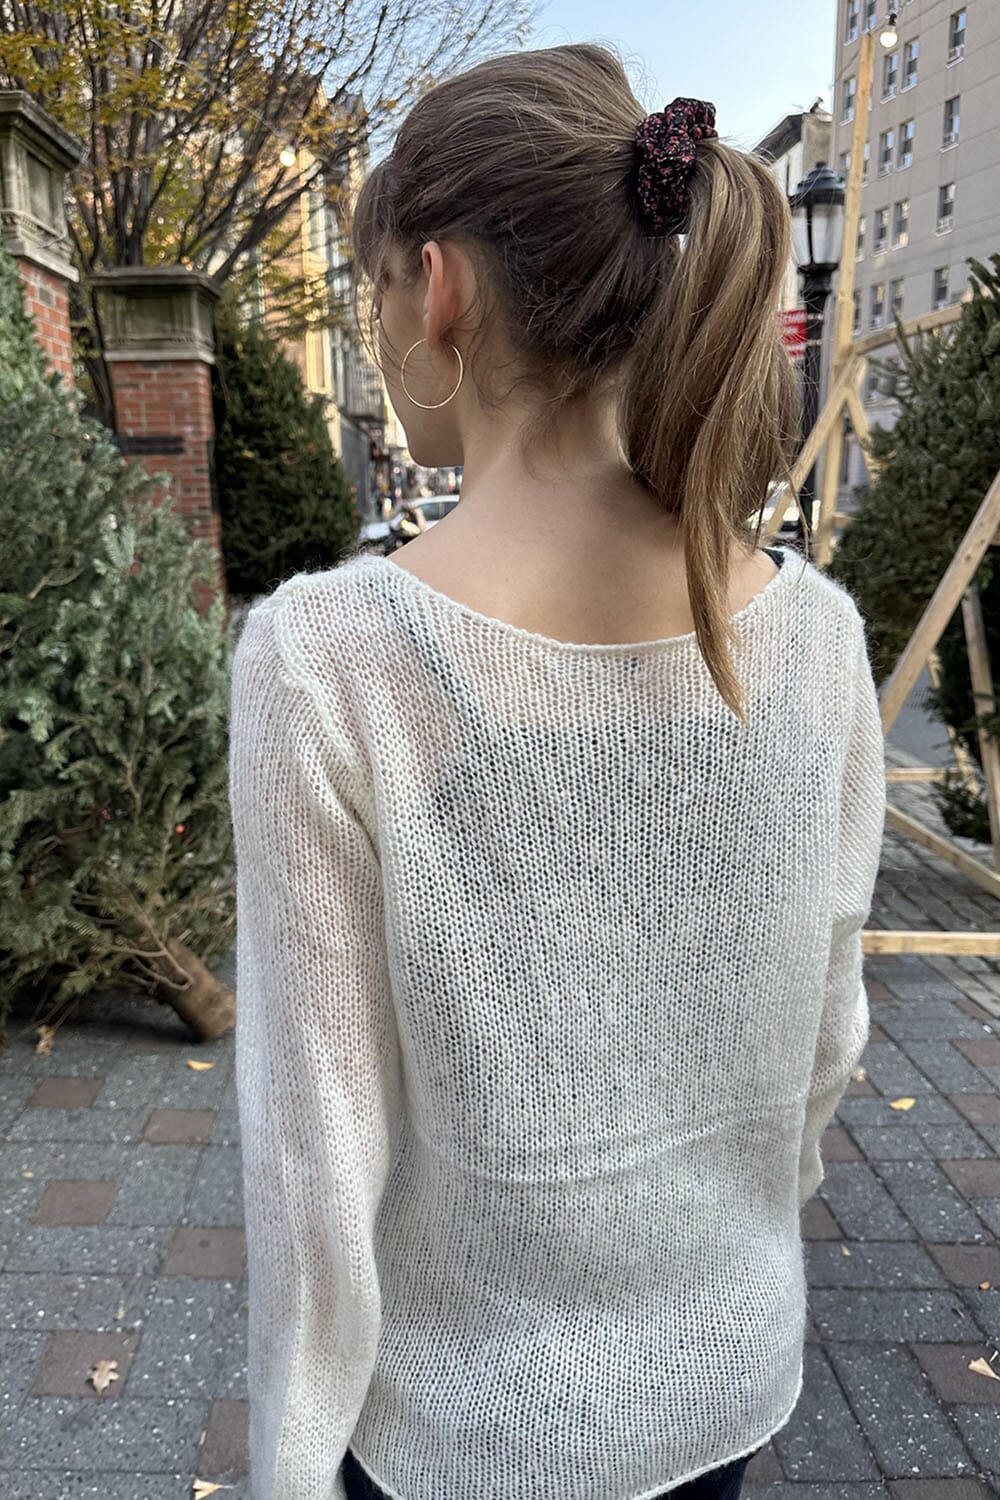 PJ boat neck sweater with stitch detail